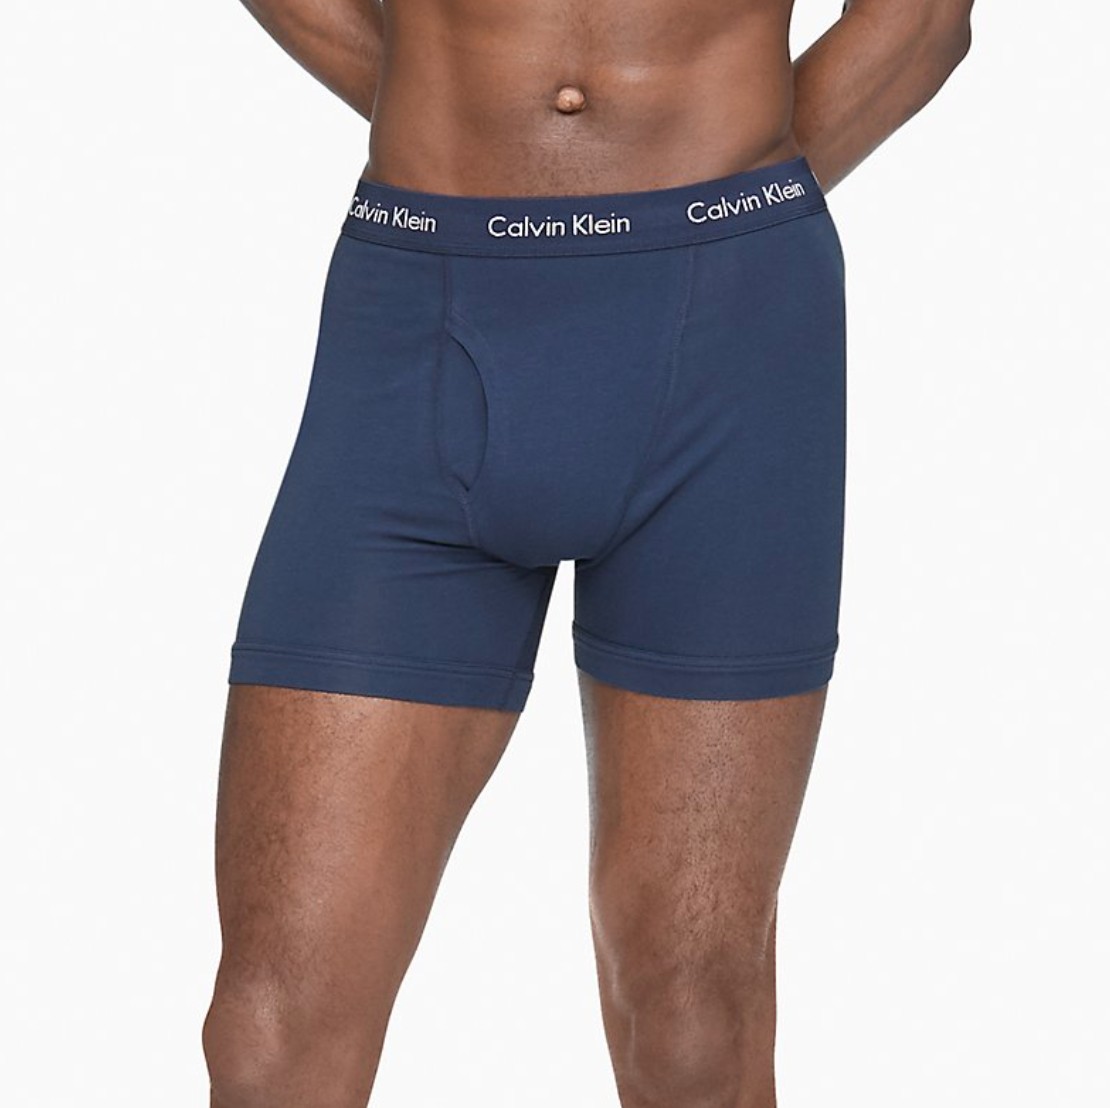 Mack Weldon's Insanely Popular Boxer Briefs Are Back in Stock